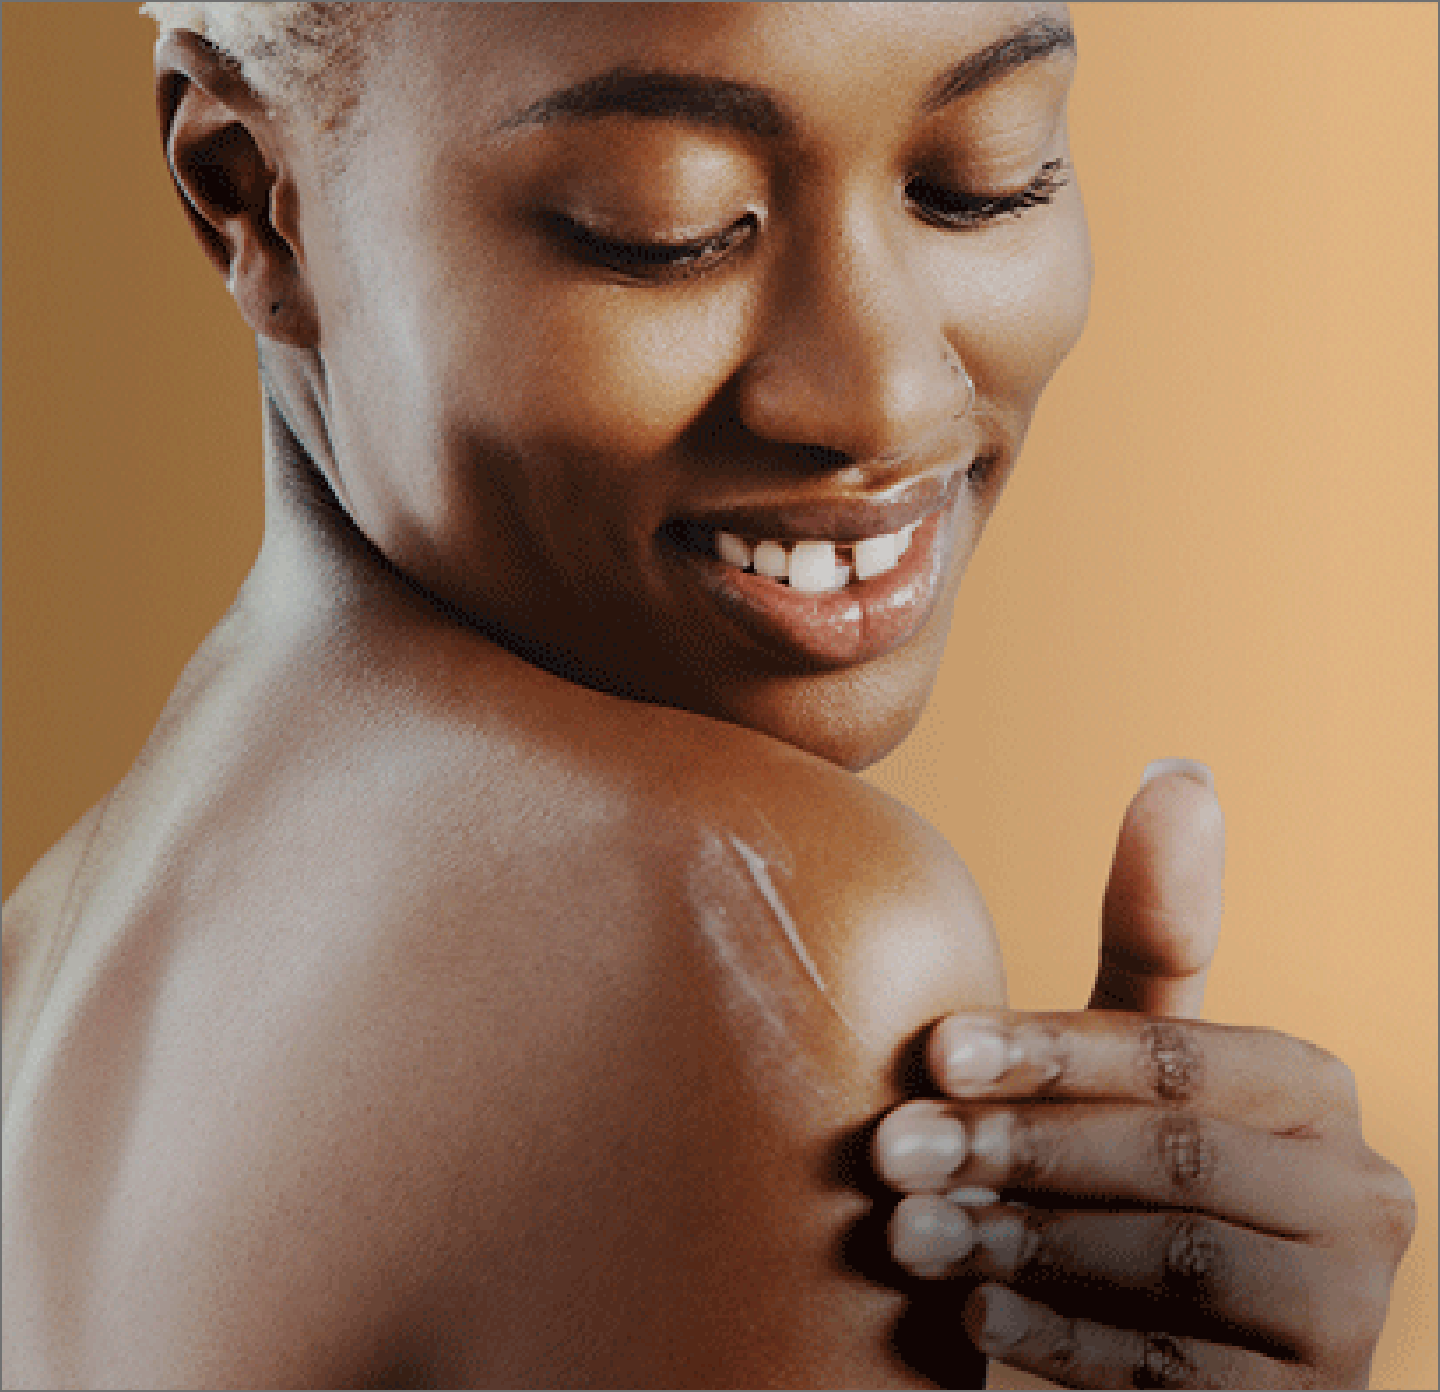 Woman applying lotion to uneven skin tone